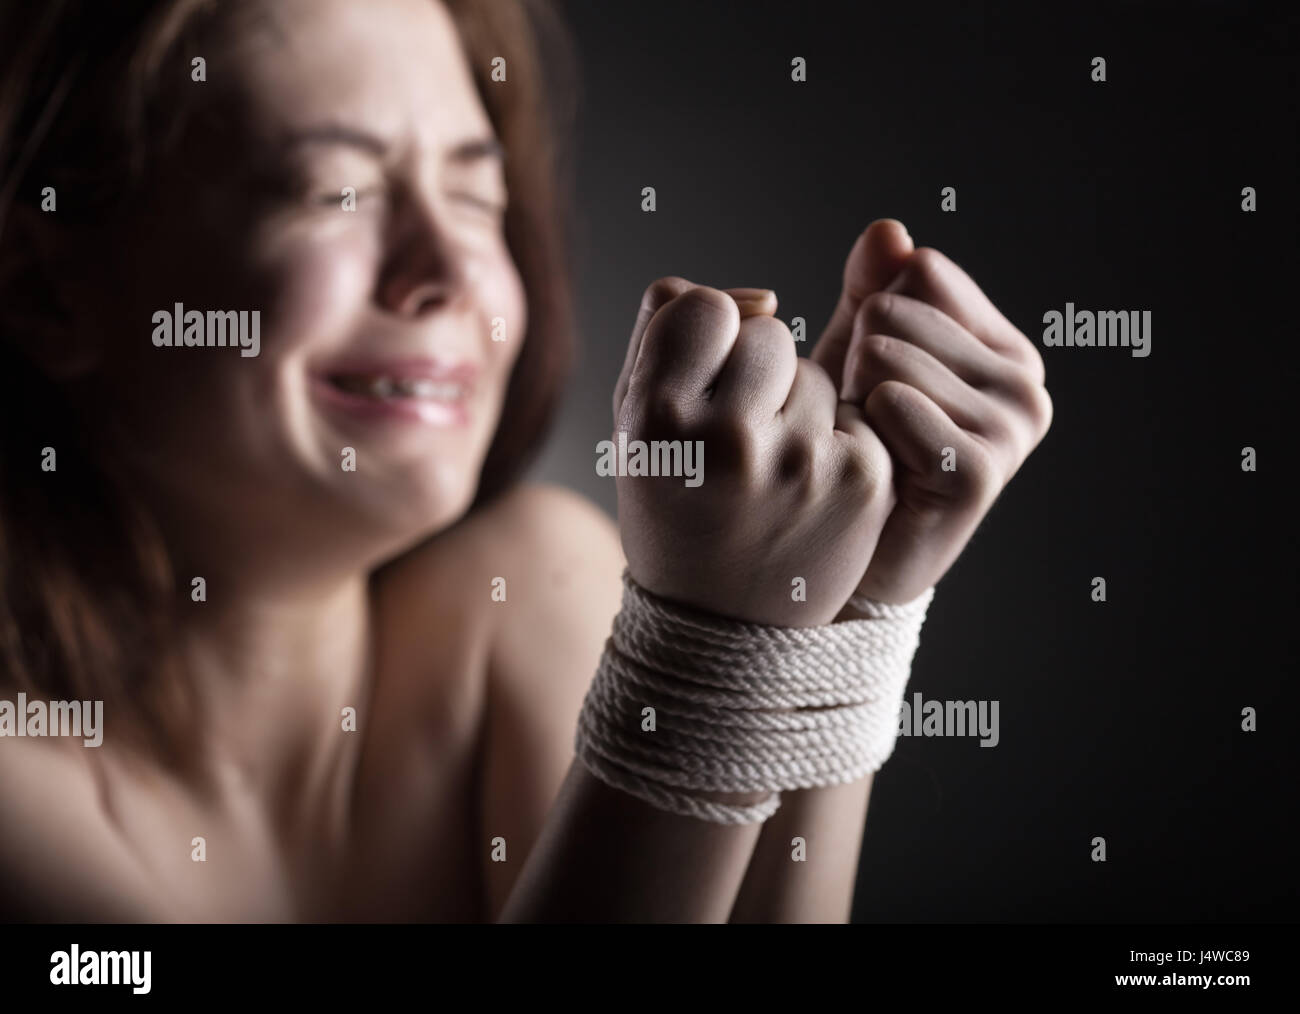 Woman victim of domestic violence and abuse Stock Photo